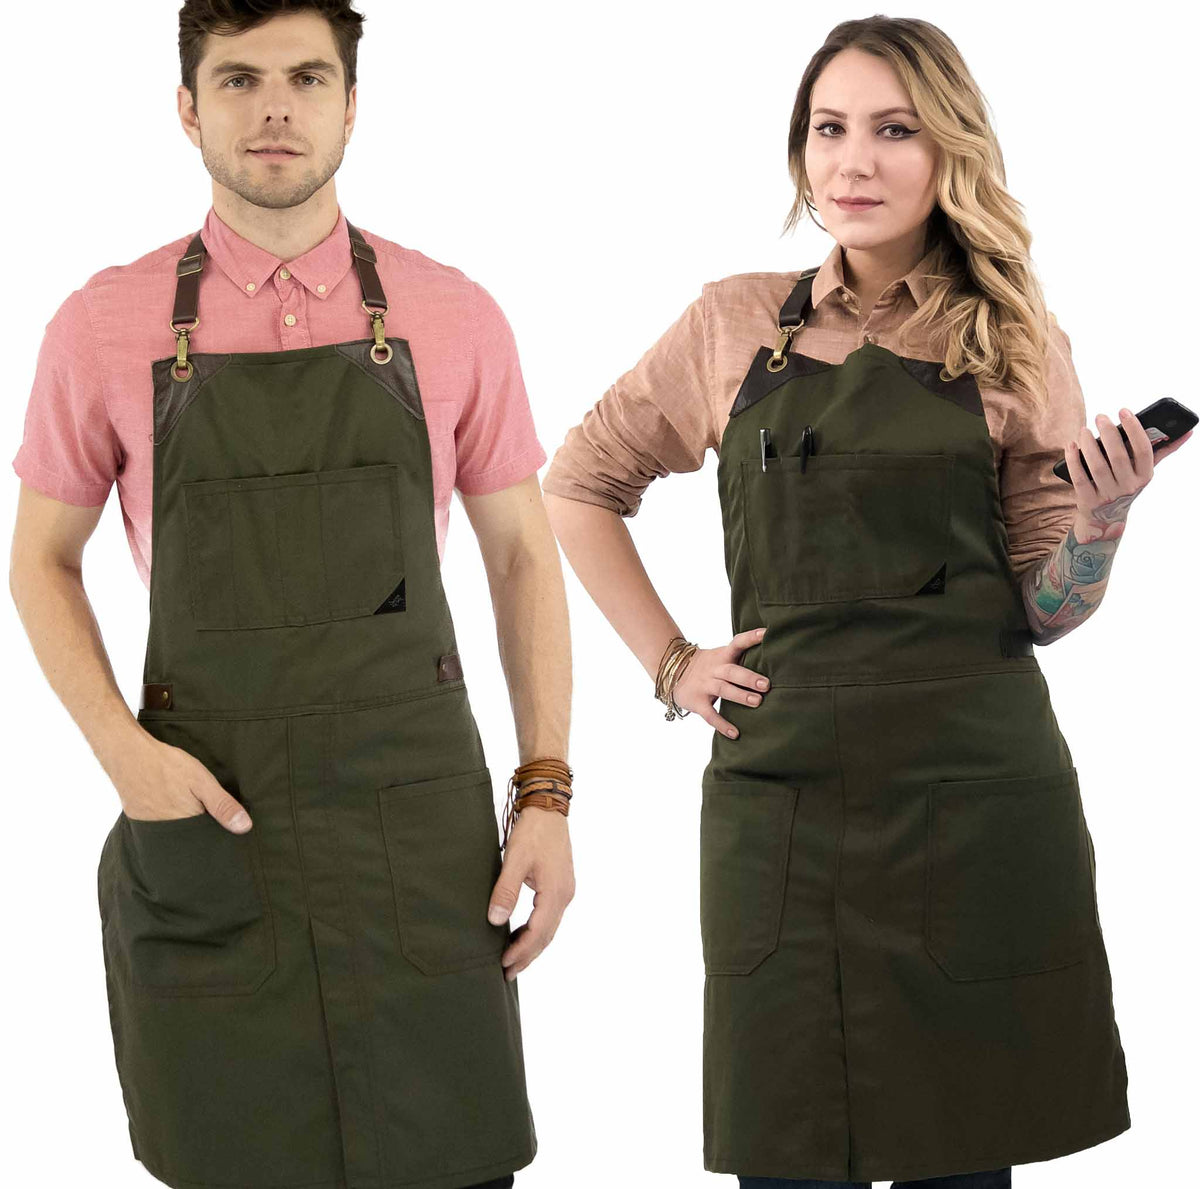 Leather Straps Apron - Twill - Easy-Fastening No-Tie - Chef, Bartender, Shop, Barista - Under NY Sky